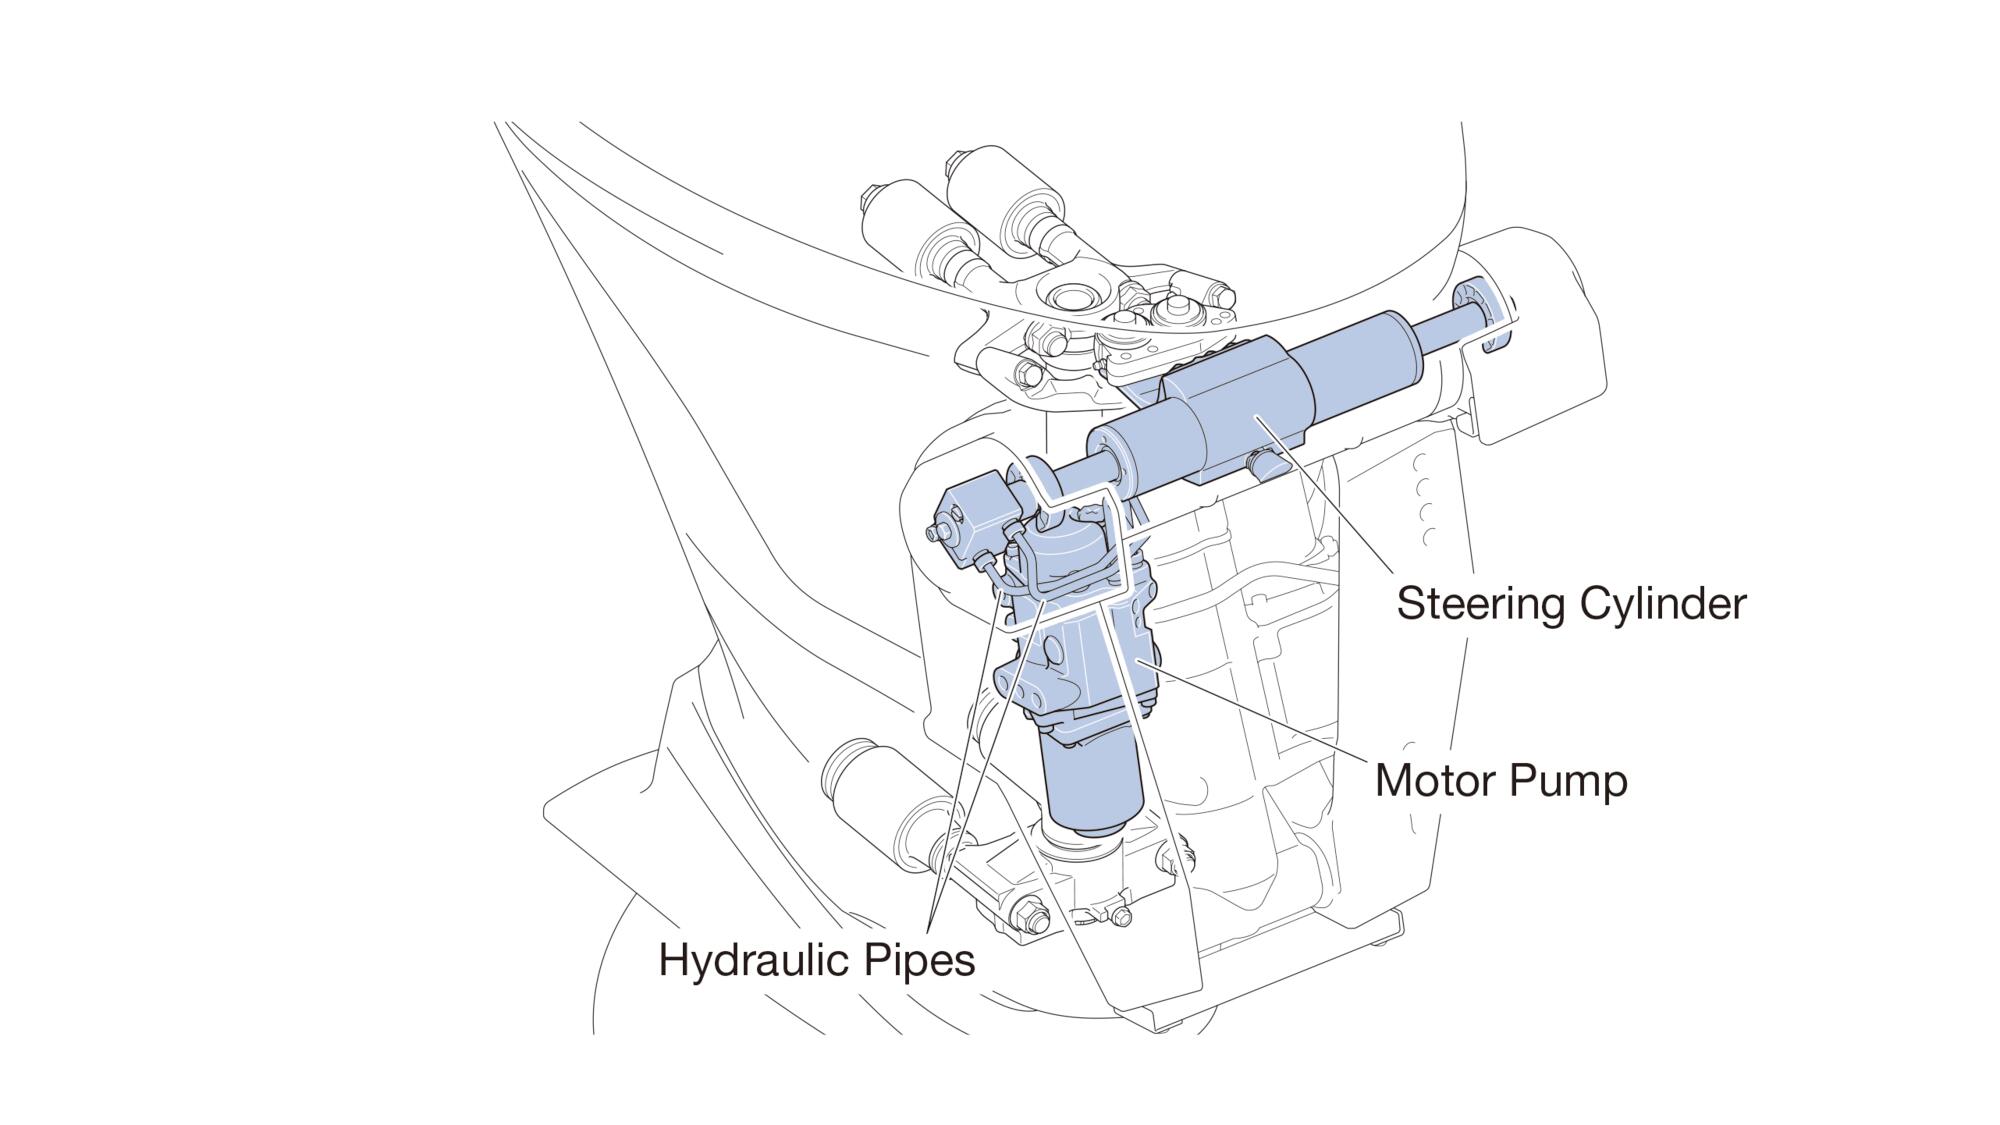 Integrated Electro-Hydraulic Steering